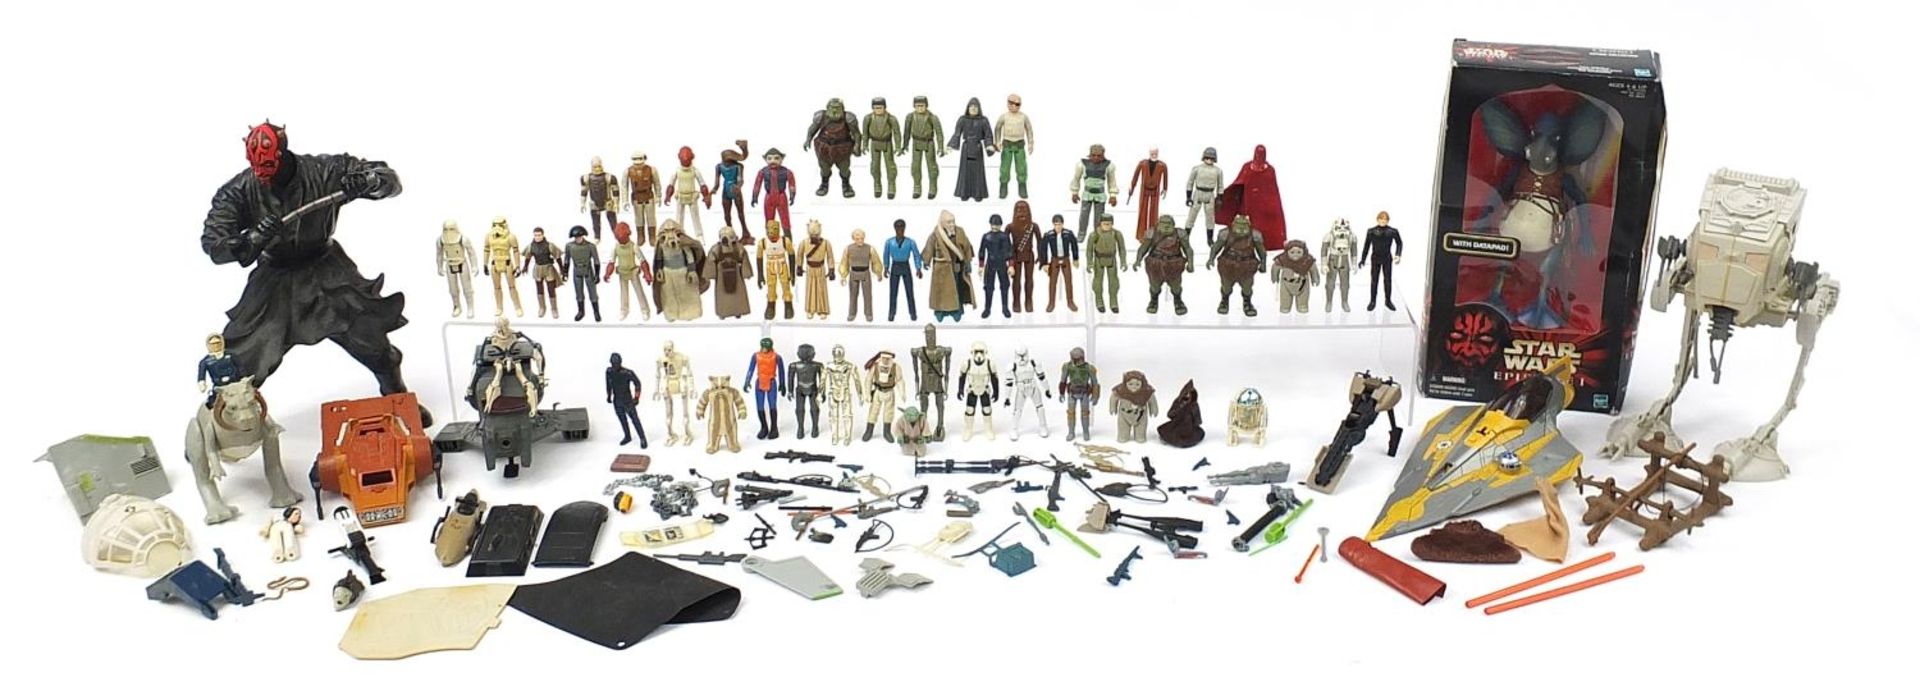 Collection of vintage and later Star Wars action figures including Watto with box and Darth Vader